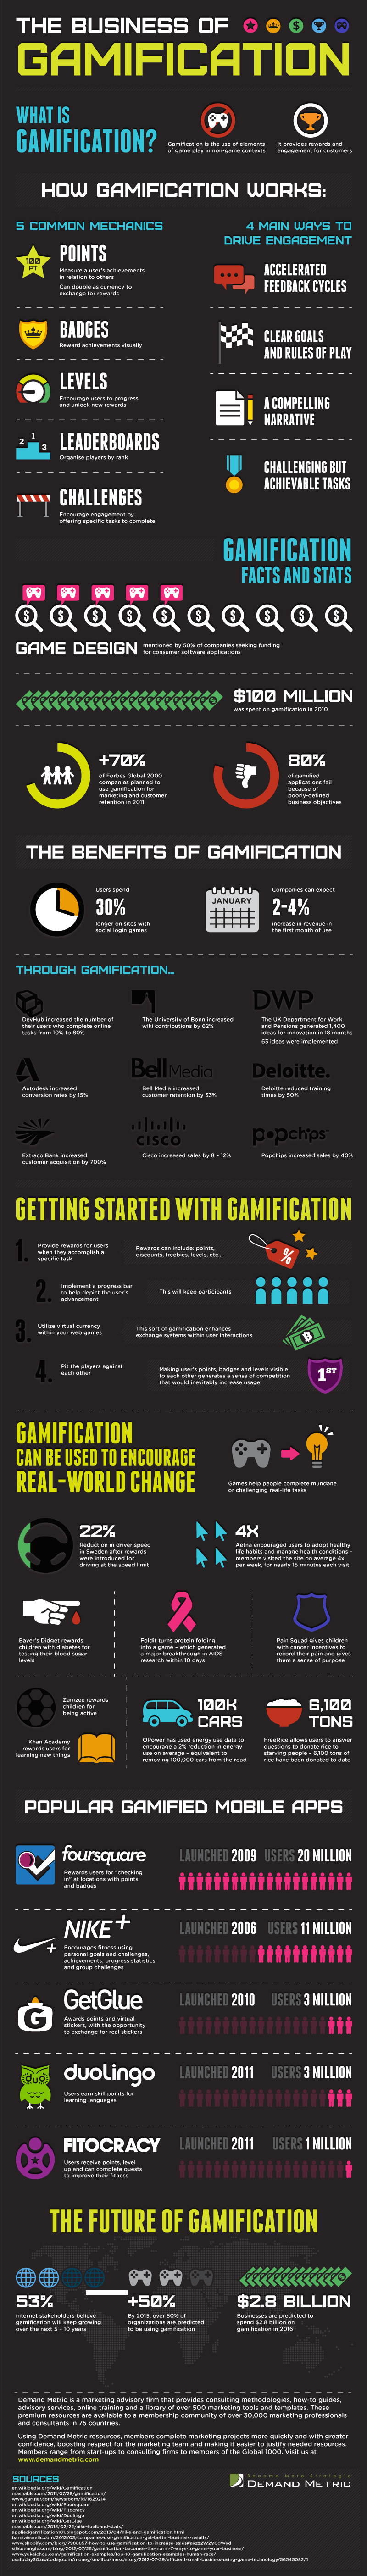 Gamification can help your retention plan